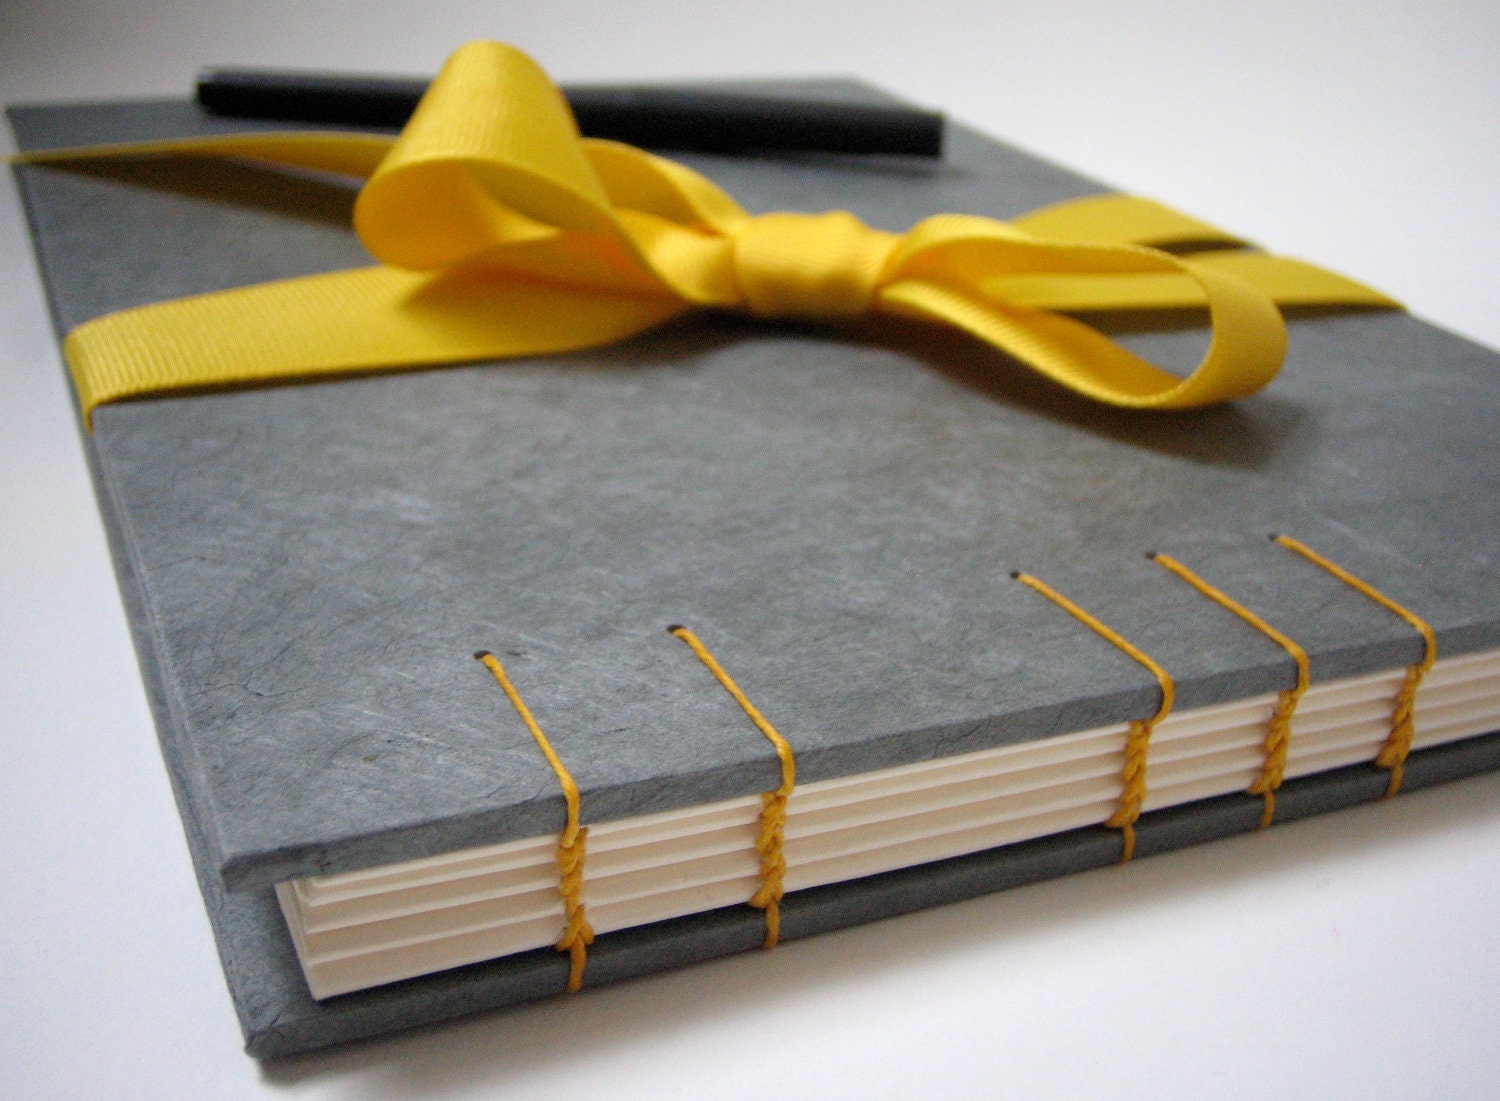 Gray Wedding Guest Book - Coptic Stitch Binding, Hand Bound Book, Gray and Yellow, Made to Order - nickelplatepress